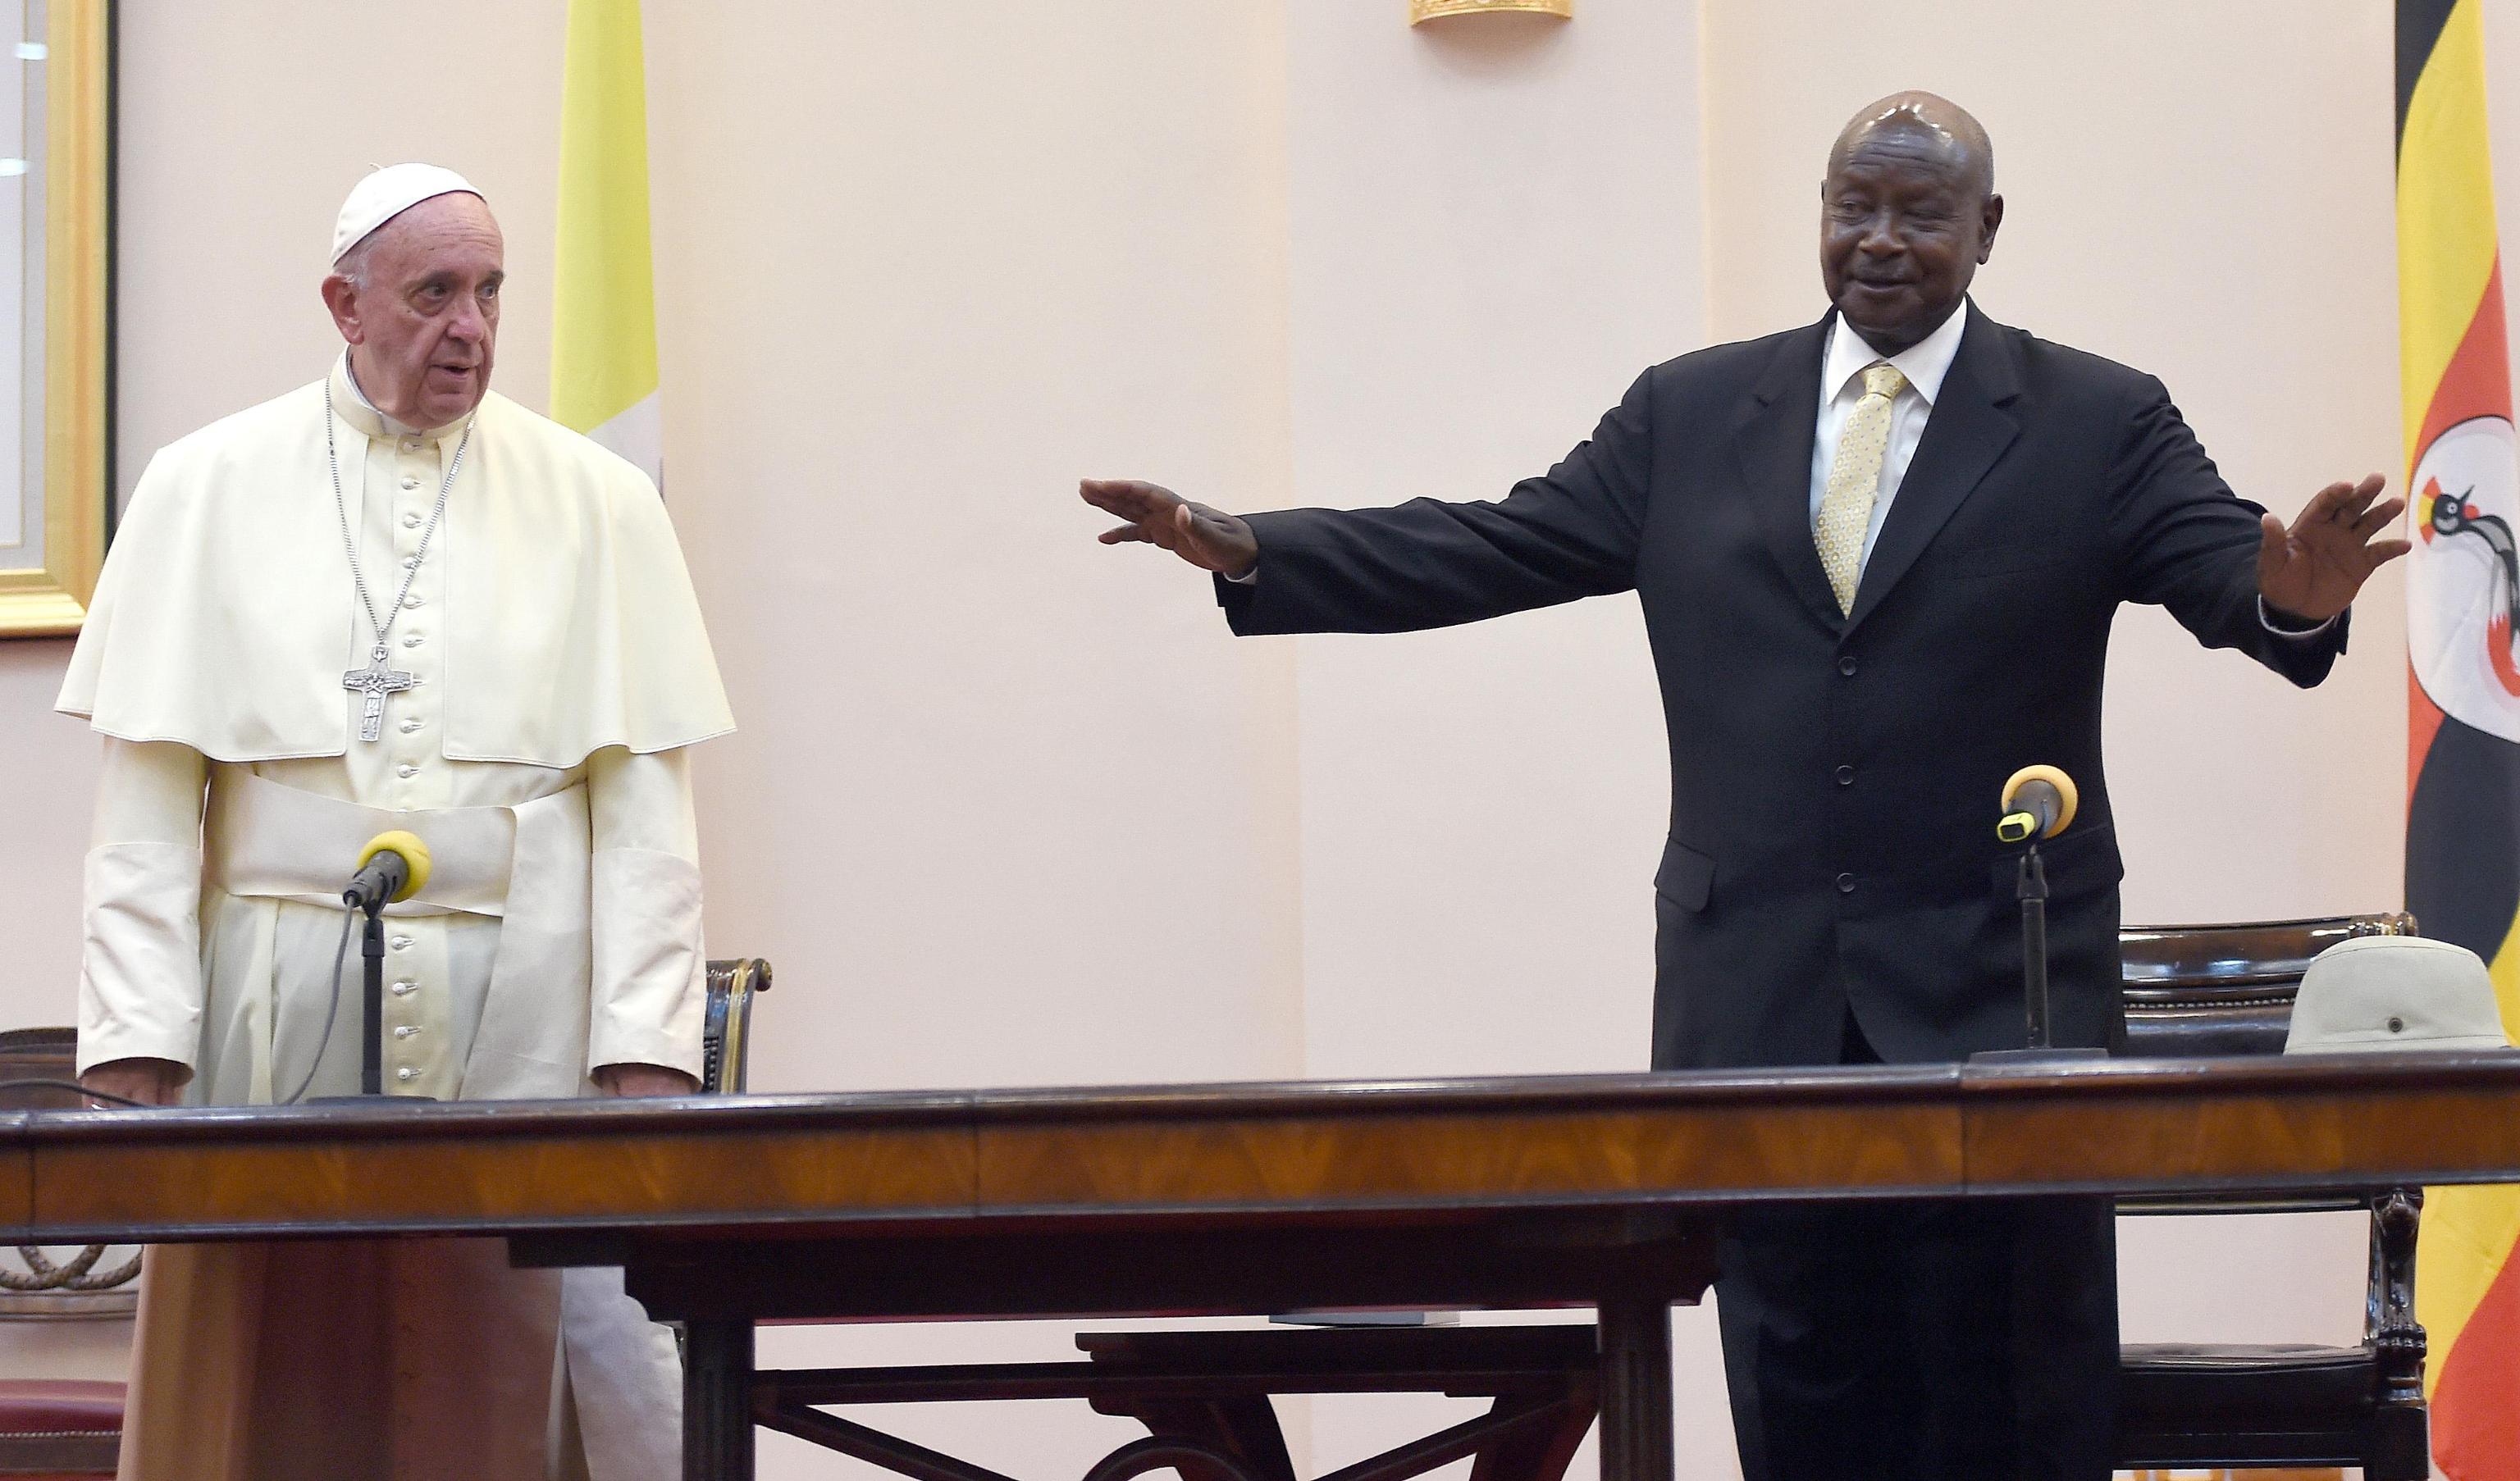 Pope Francis is welcomed by Uganda's president Yoweri Museveni at his arrival at the State House in Entebbe